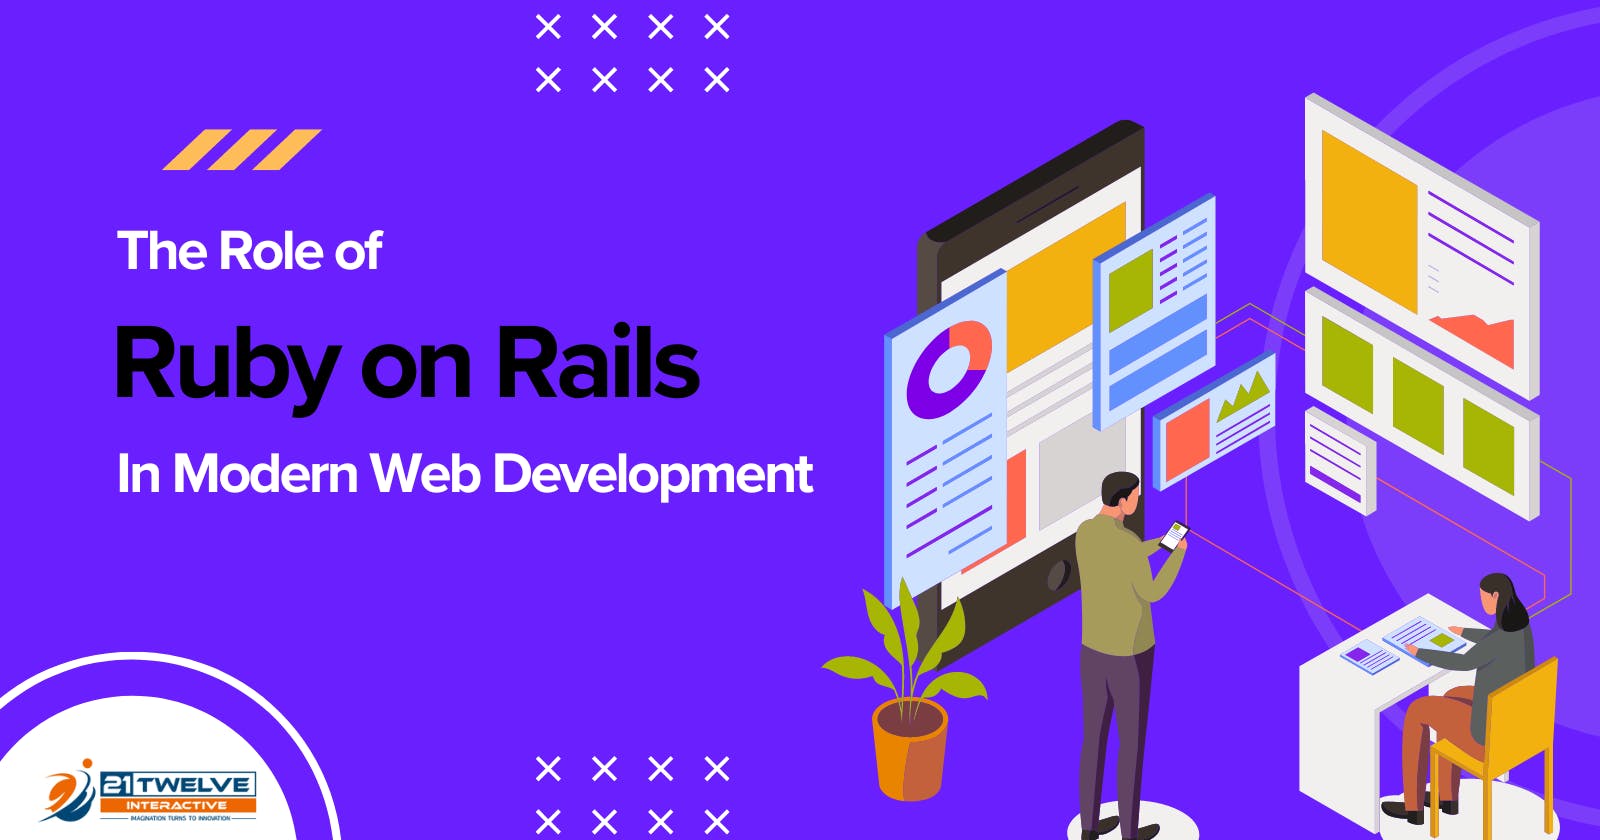 The Role of Ruby on Rails in Modern Web Development